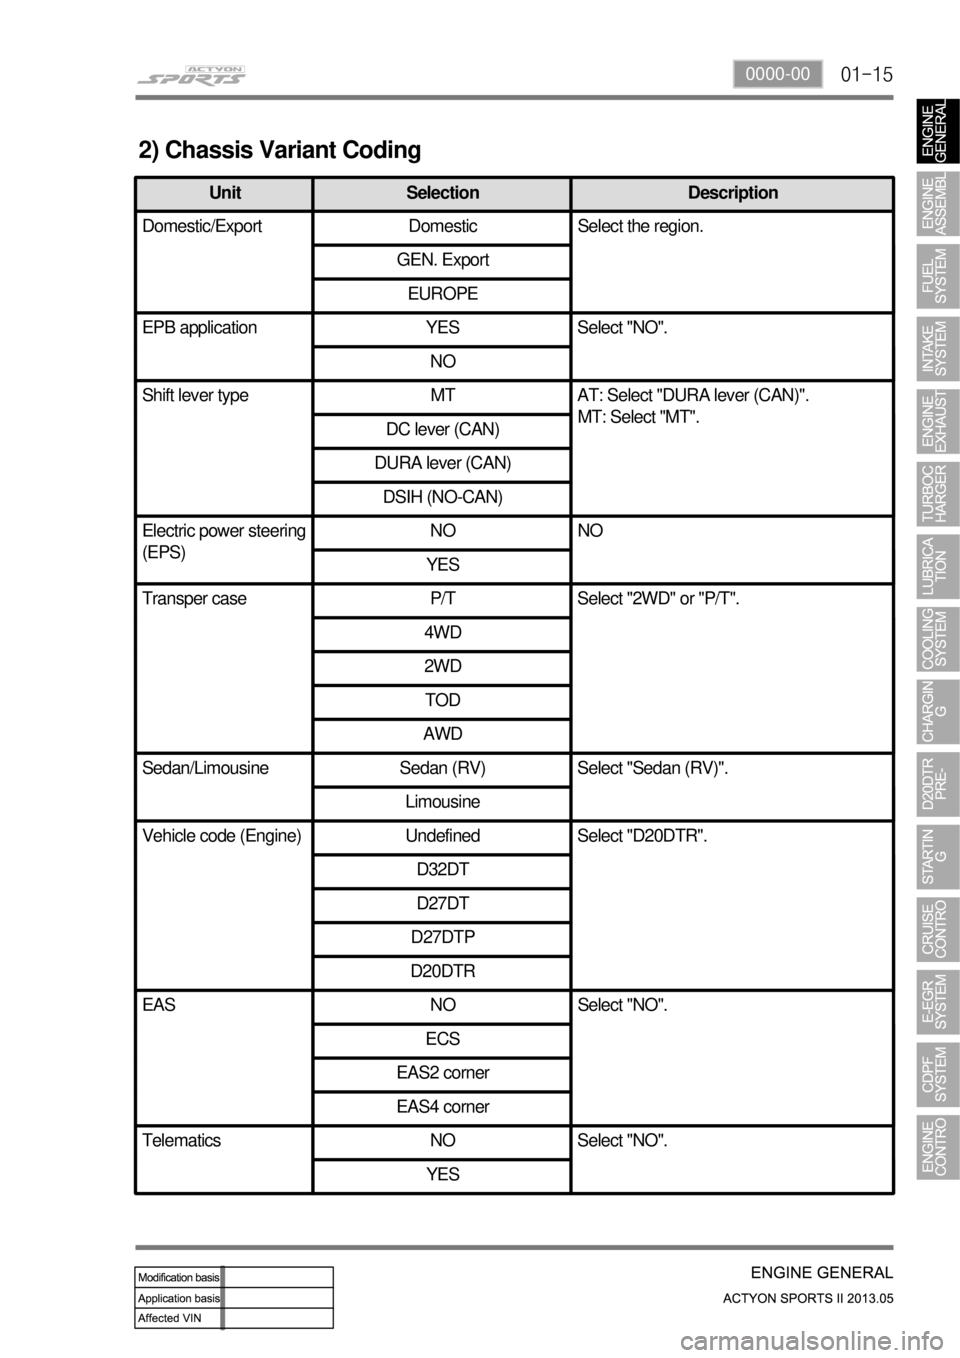 SSANGYONG NEW ACTYON SPORTS 2013  Service Manual 01-150000-00
2) Chassis Variant Coding
Unit Selection Description
Domestic/Export Domestic Select the region.
GEN. Export
EUROPE
EPB application YES Select "NO".
NO
Shift lever type MT AT: Select "DUR